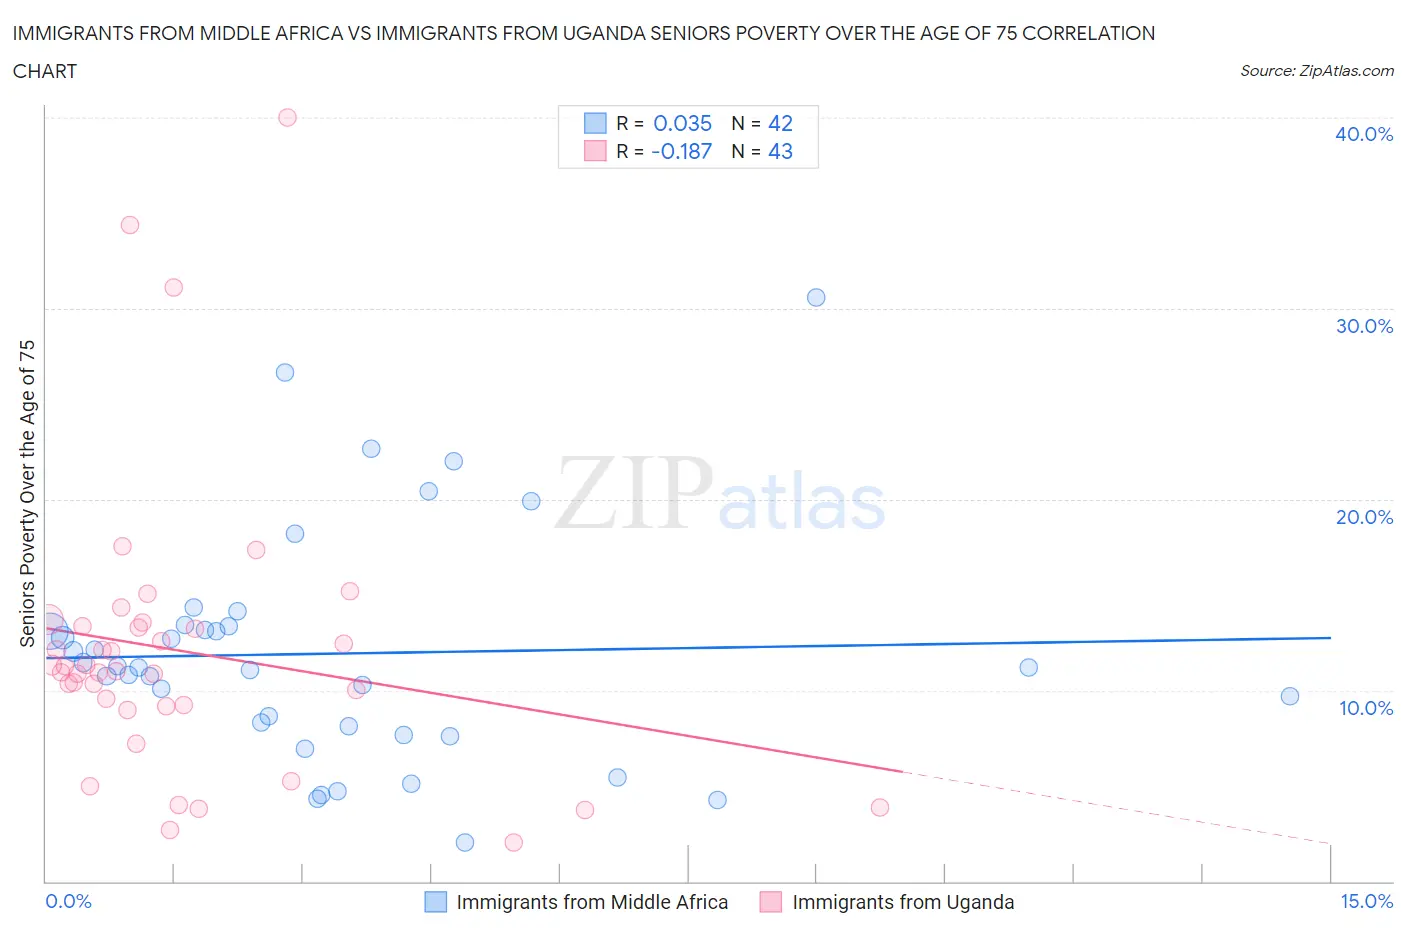 Immigrants from Middle Africa vs Immigrants from Uganda Seniors Poverty Over the Age of 75